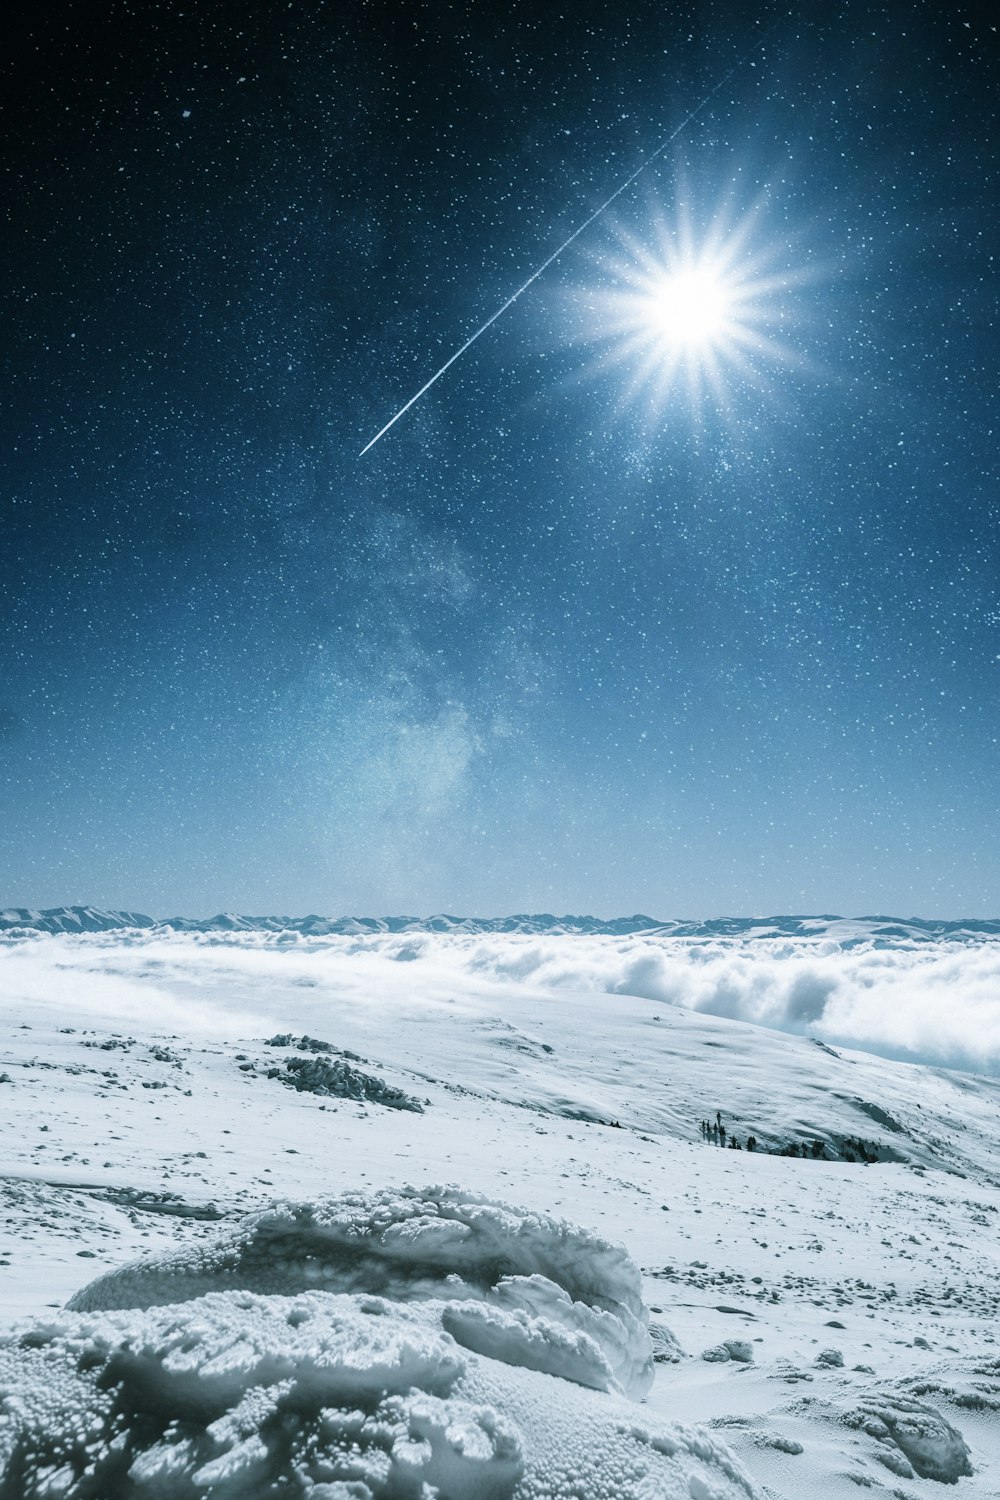 a bright star shines above a snowy landscape